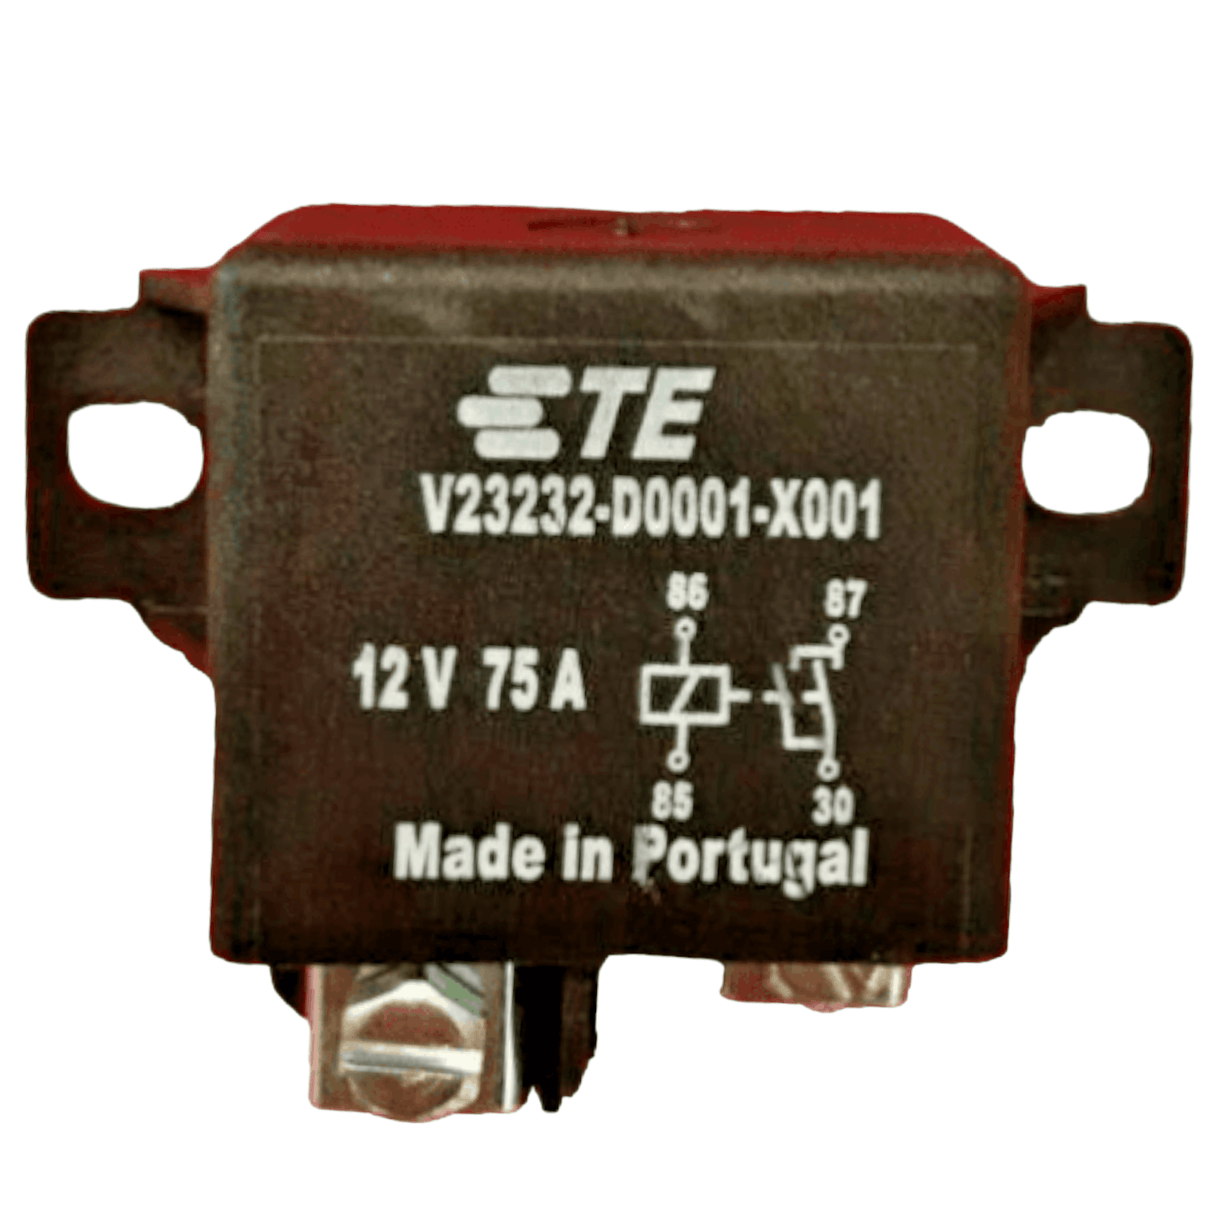 V23232-D0001-X001 Ete® Automative Relay 75 Amp/ 12 Volt 1904000-1 - Truck To Trailer